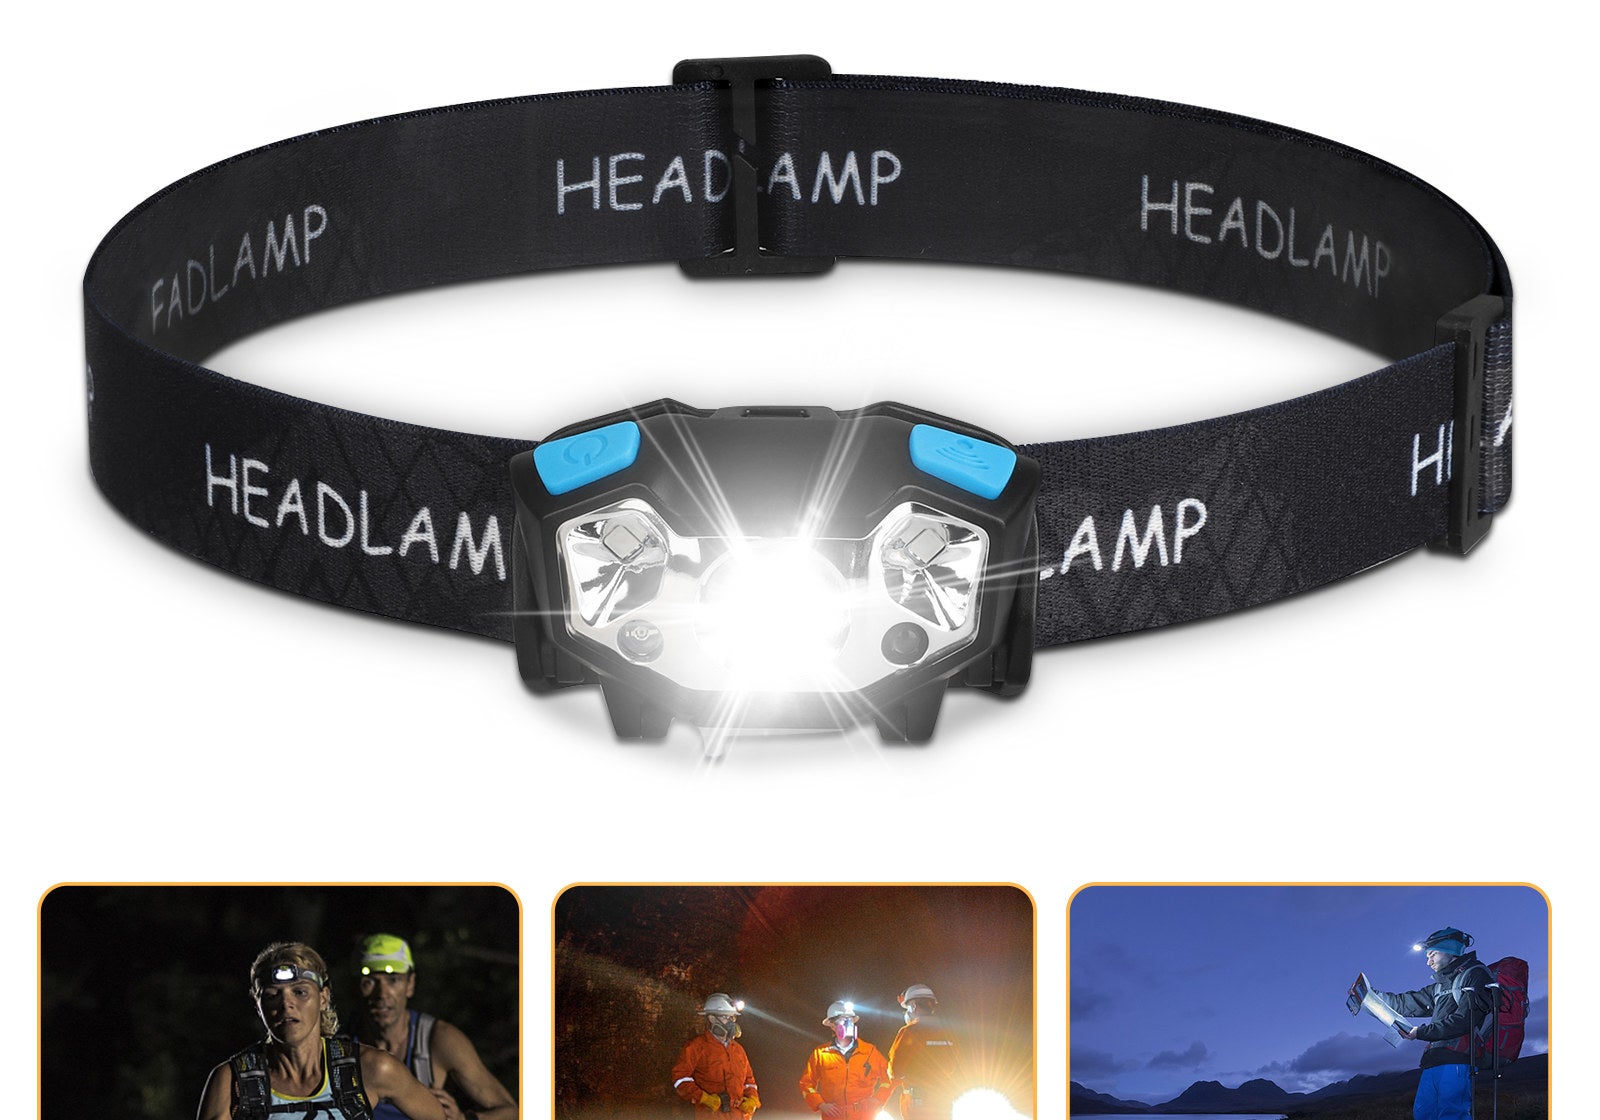 An image of a waterproof LED headlamp with five lighting modes